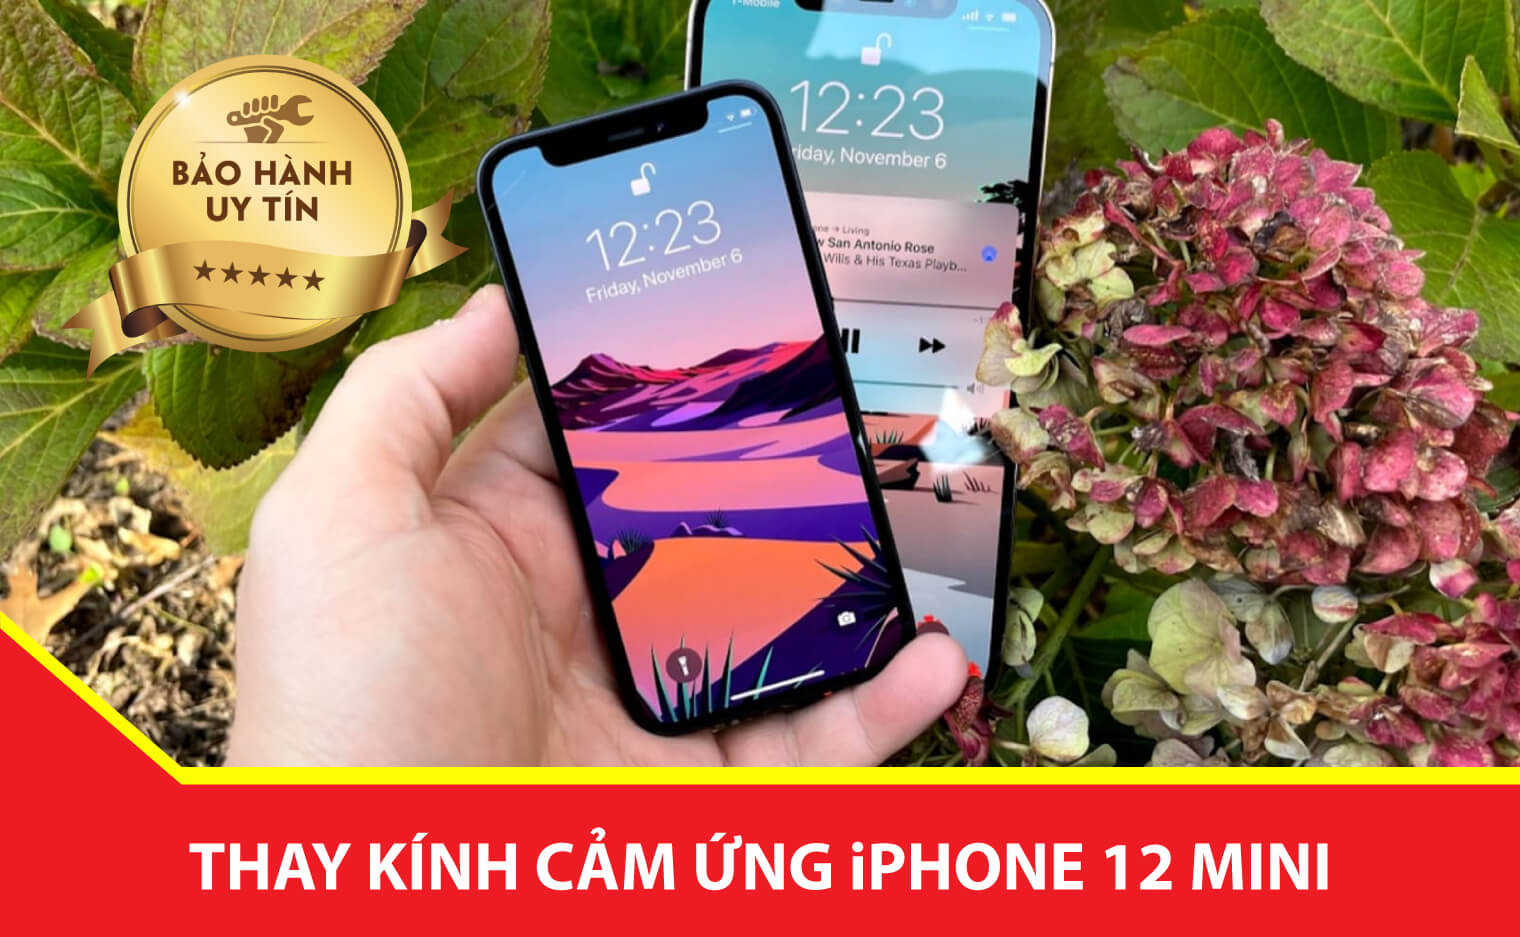 thay kinh cam ung iphone 12 mini